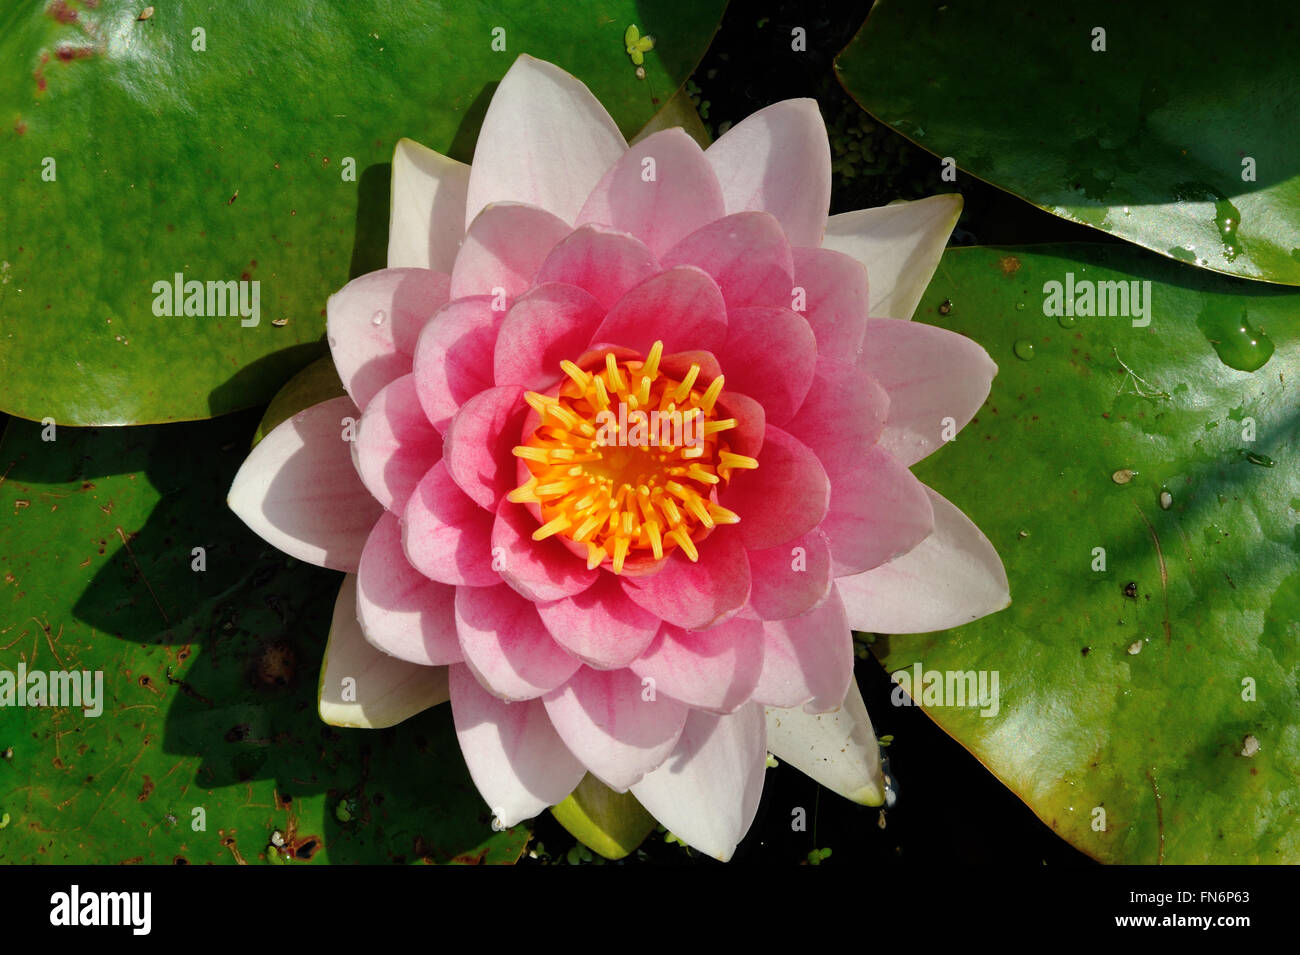 a lily flower in full bloom viewed from above with pink and white florets Stock Photo